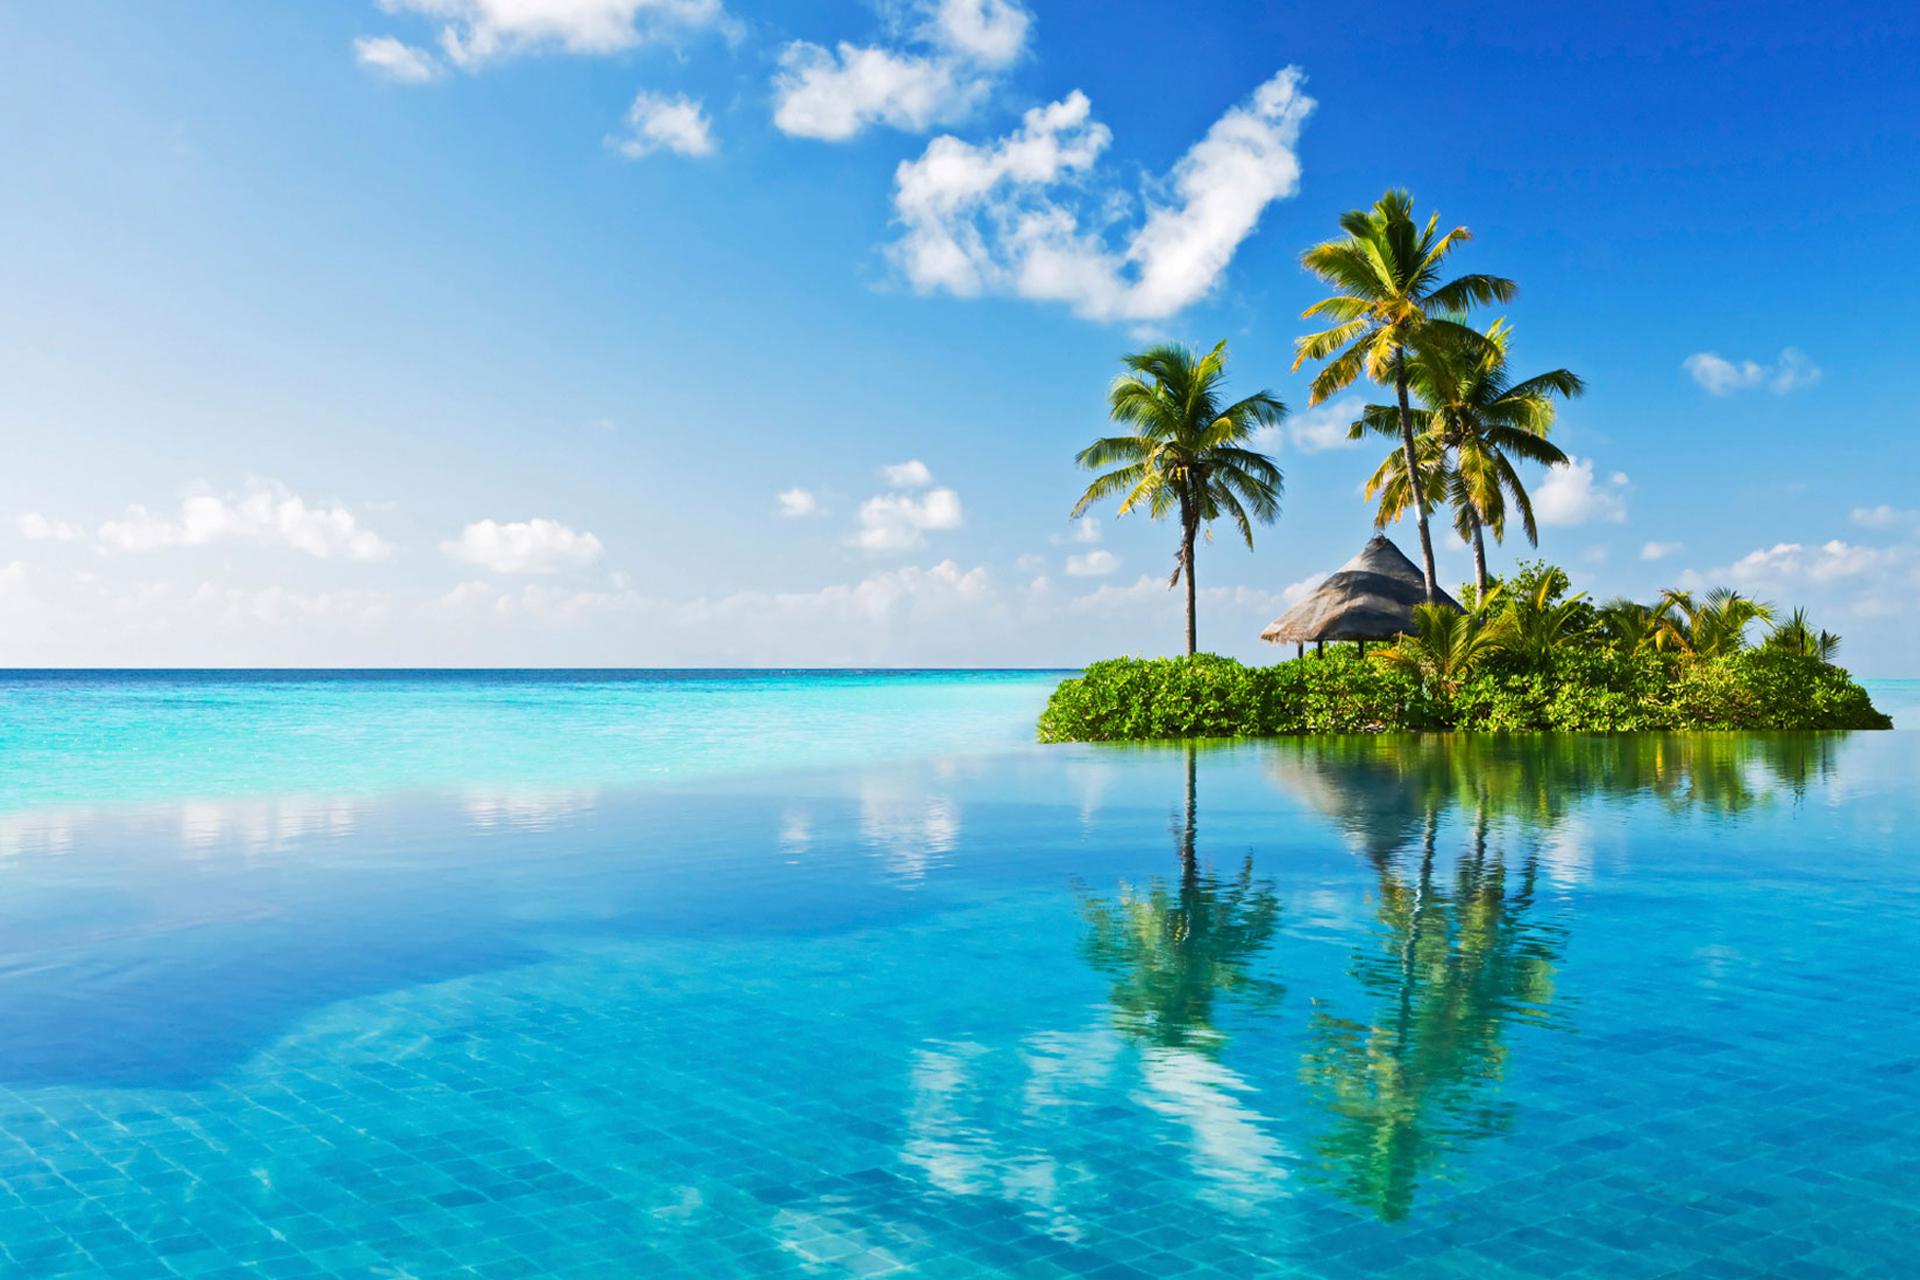 Tropical island - (#115779) - High Quality and Resolution ...